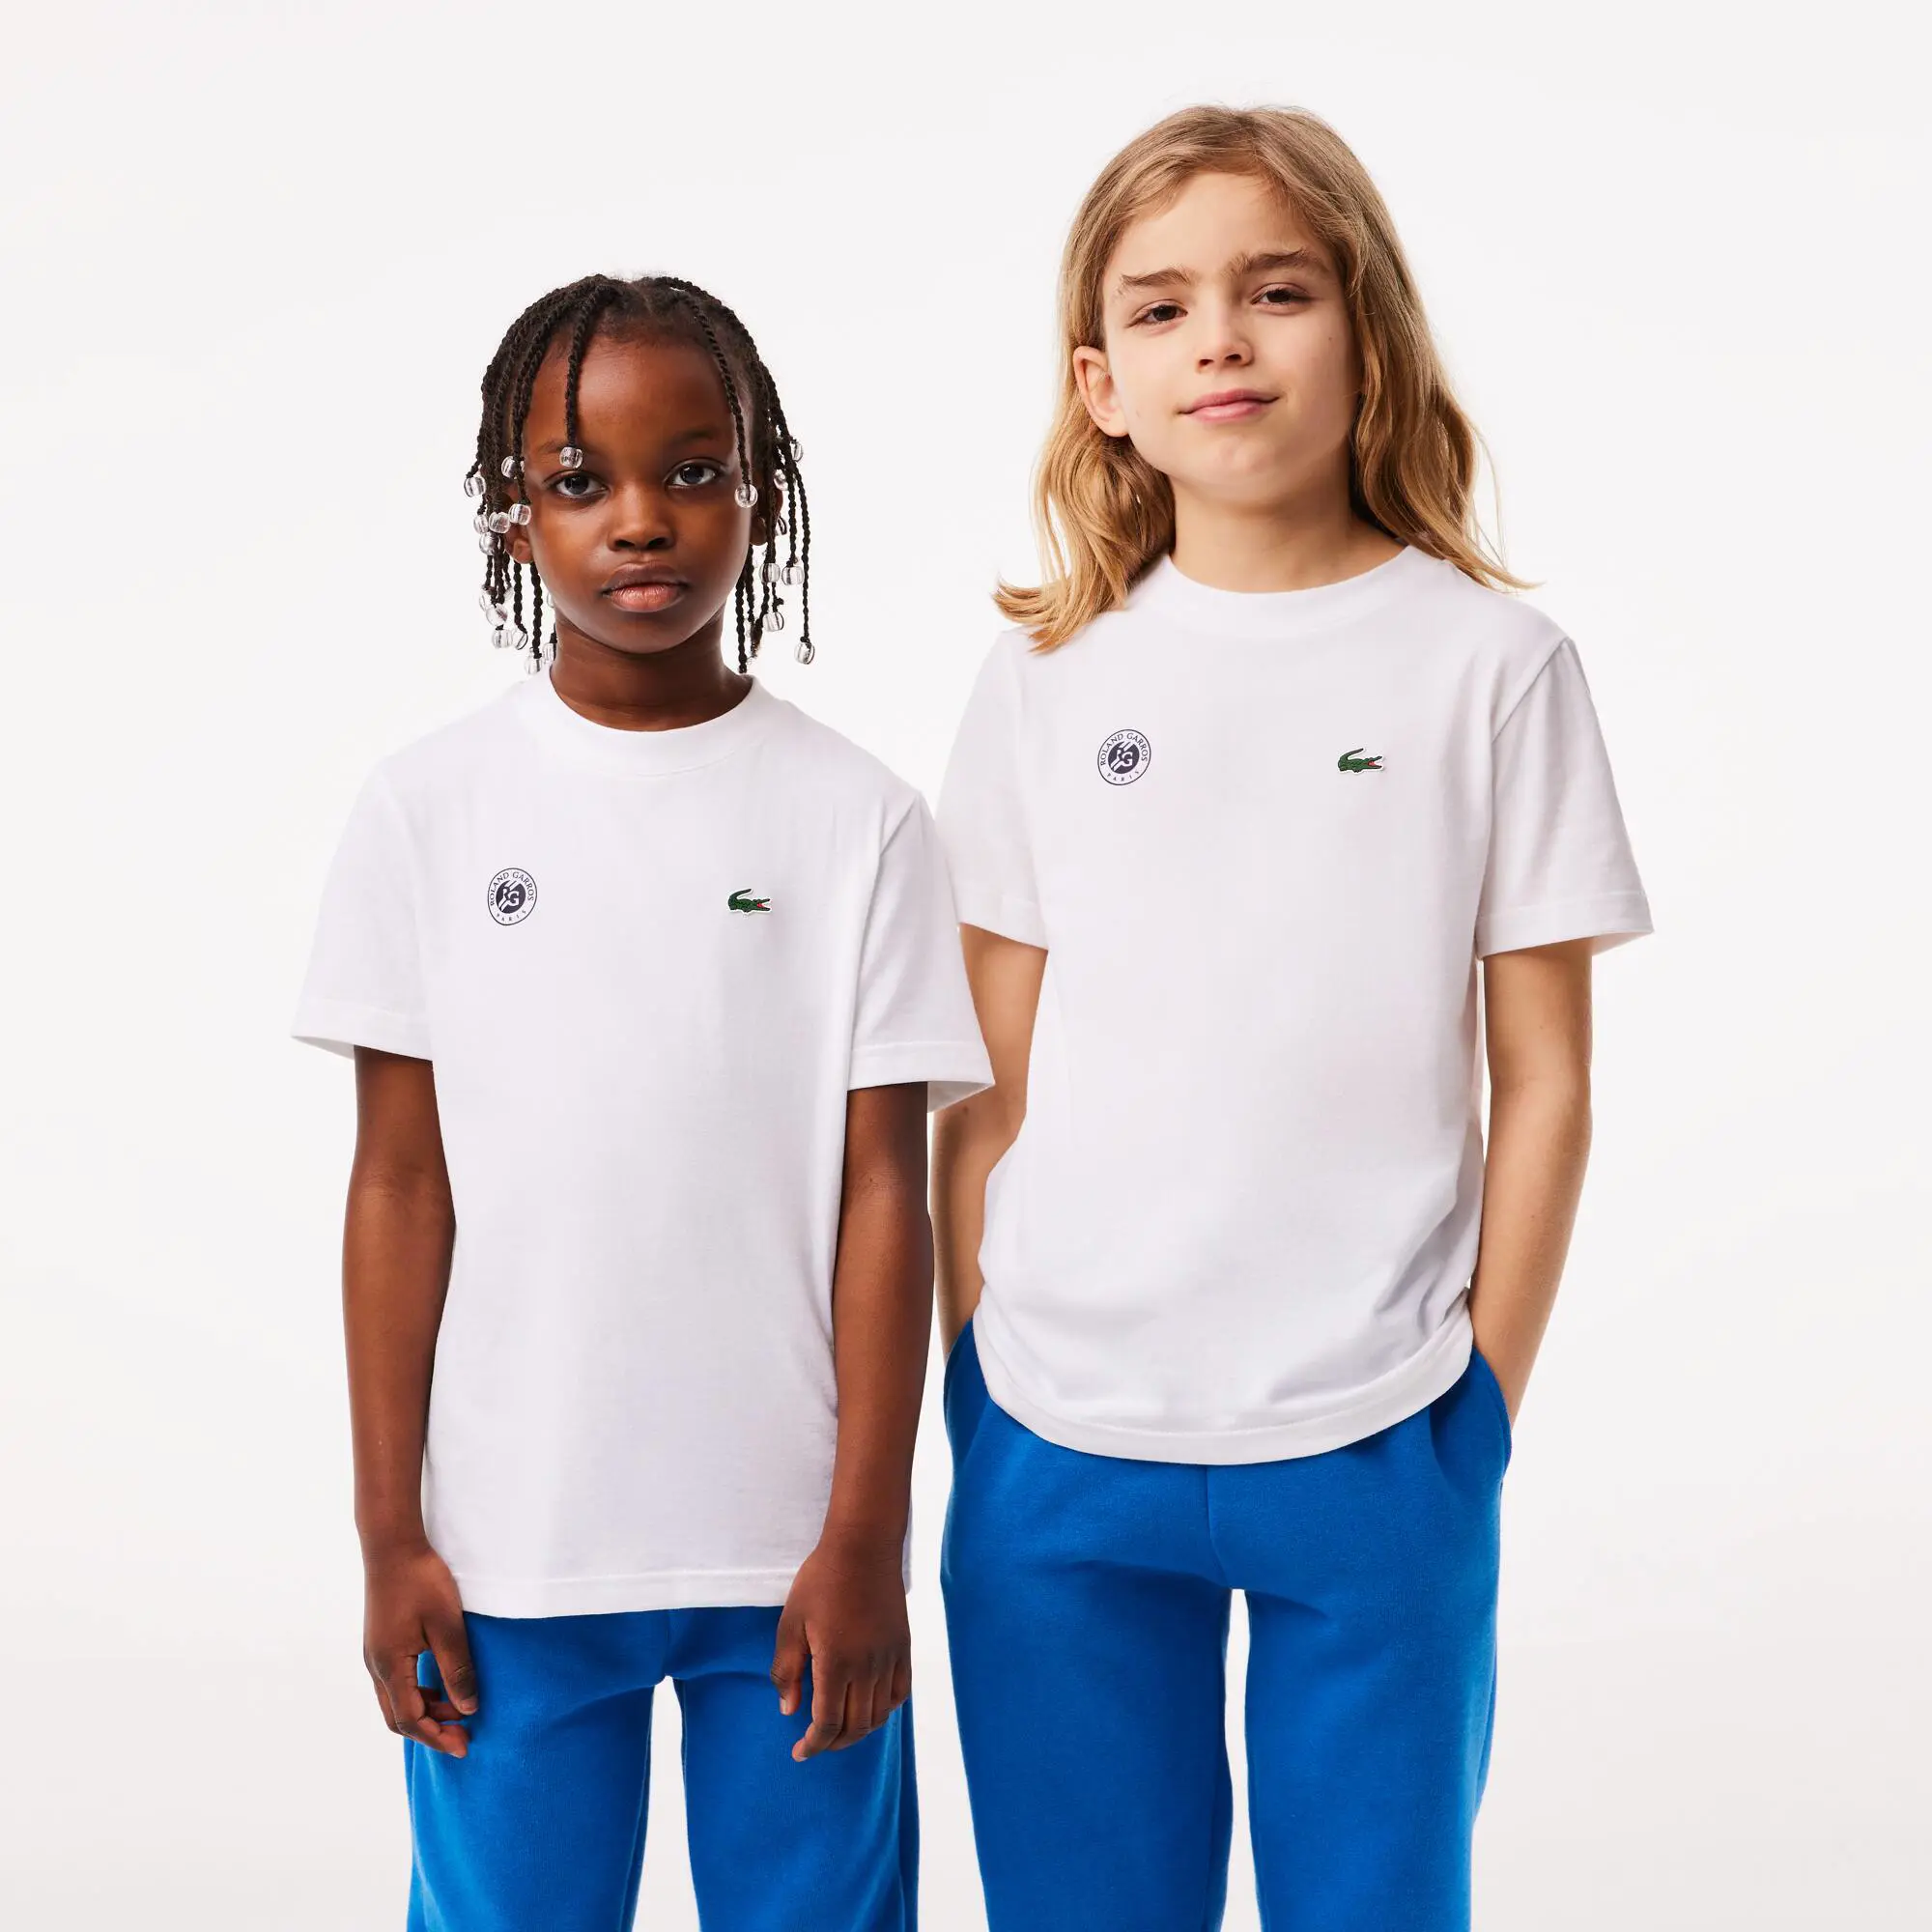 Lacoste Kinder French Open Edition Jersey T-Shirt. 1